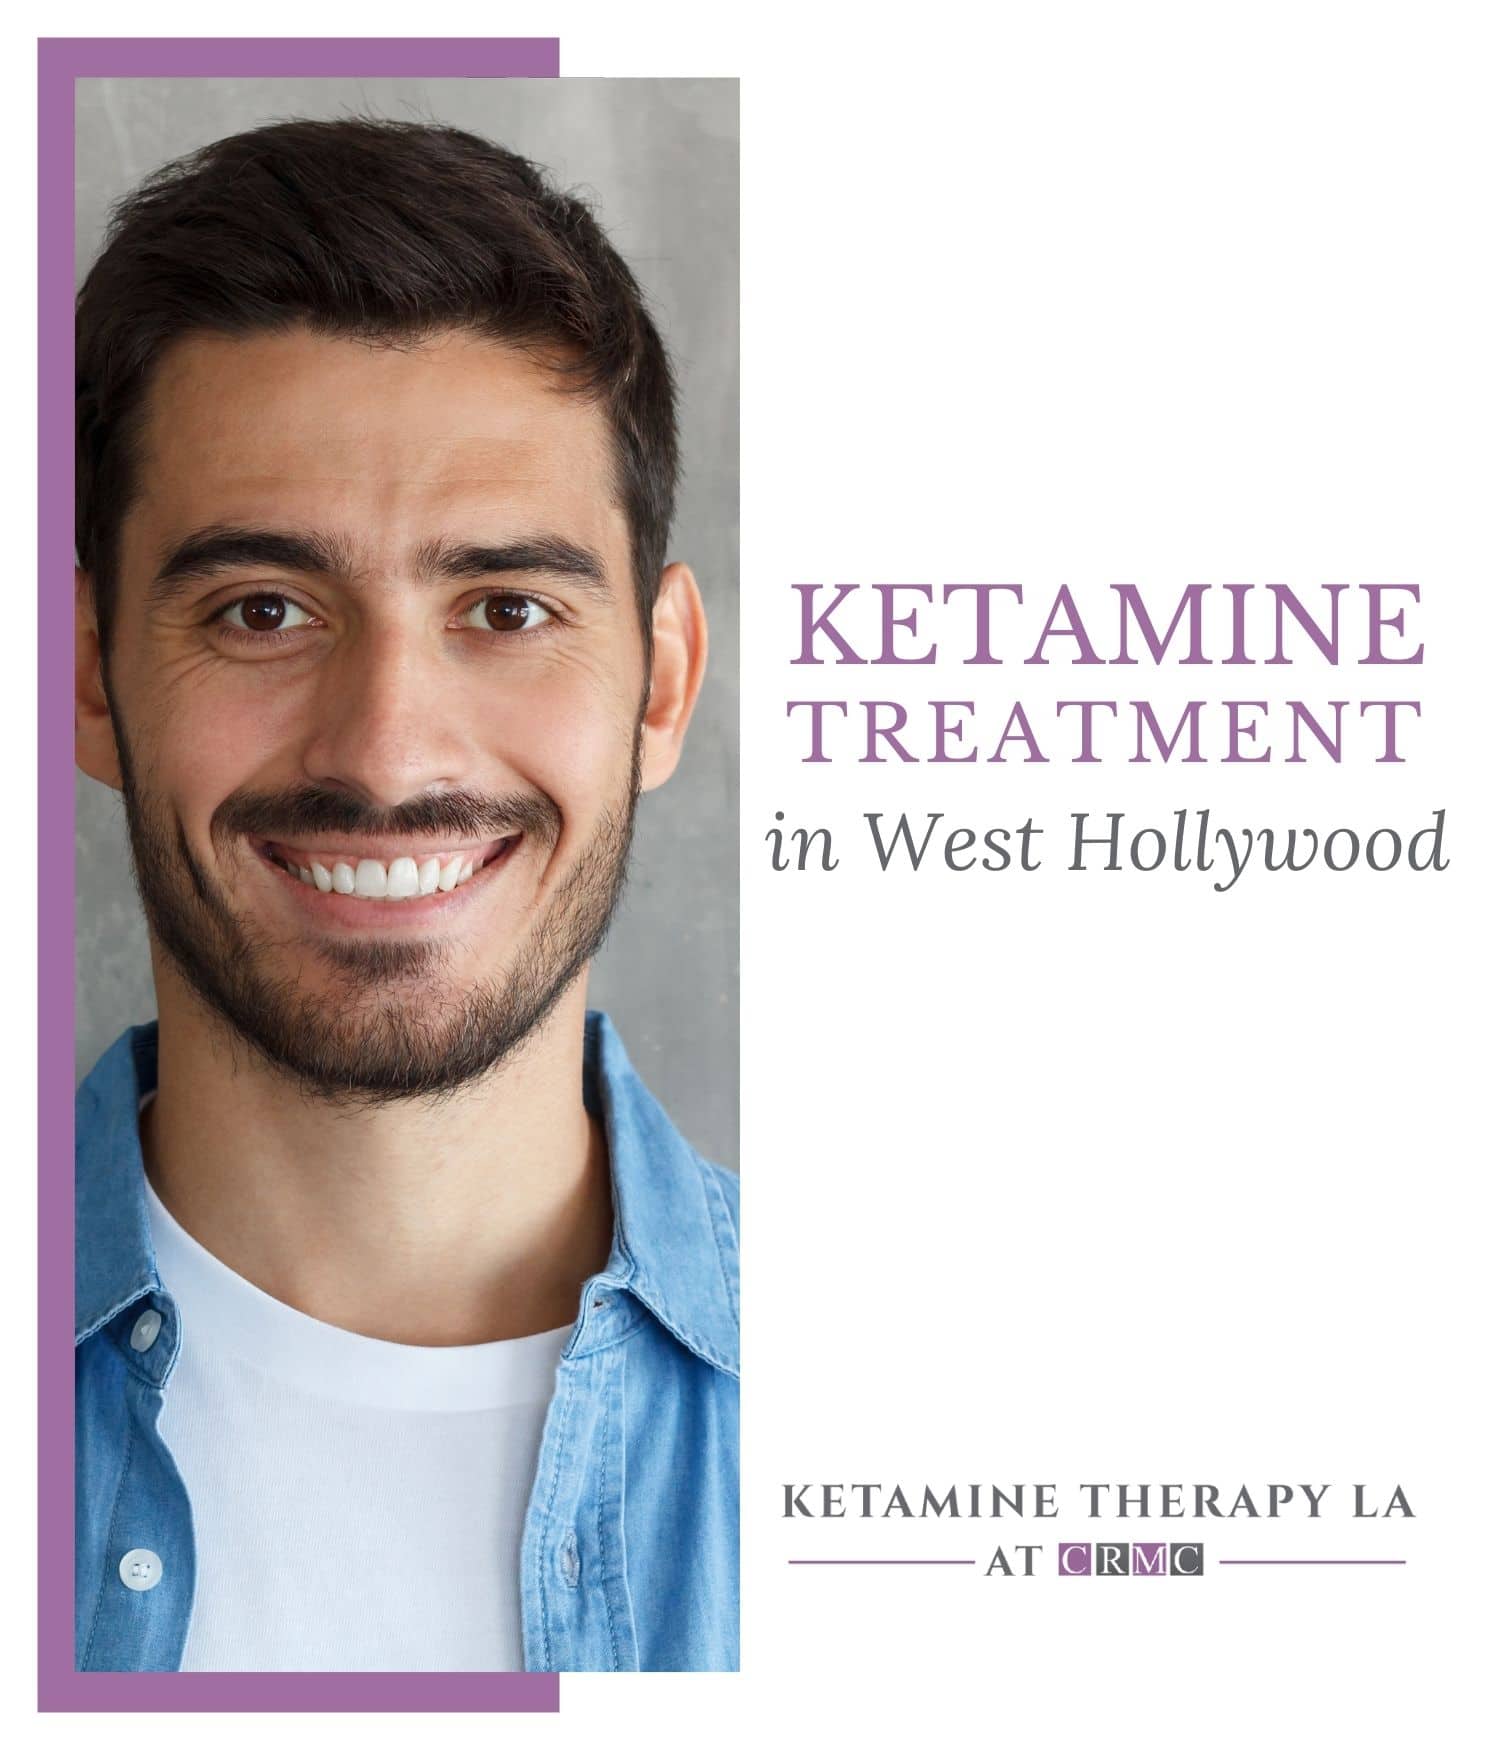 Man wearing blue collared shirt and smiling because of positive results from Ketamine Treatment.